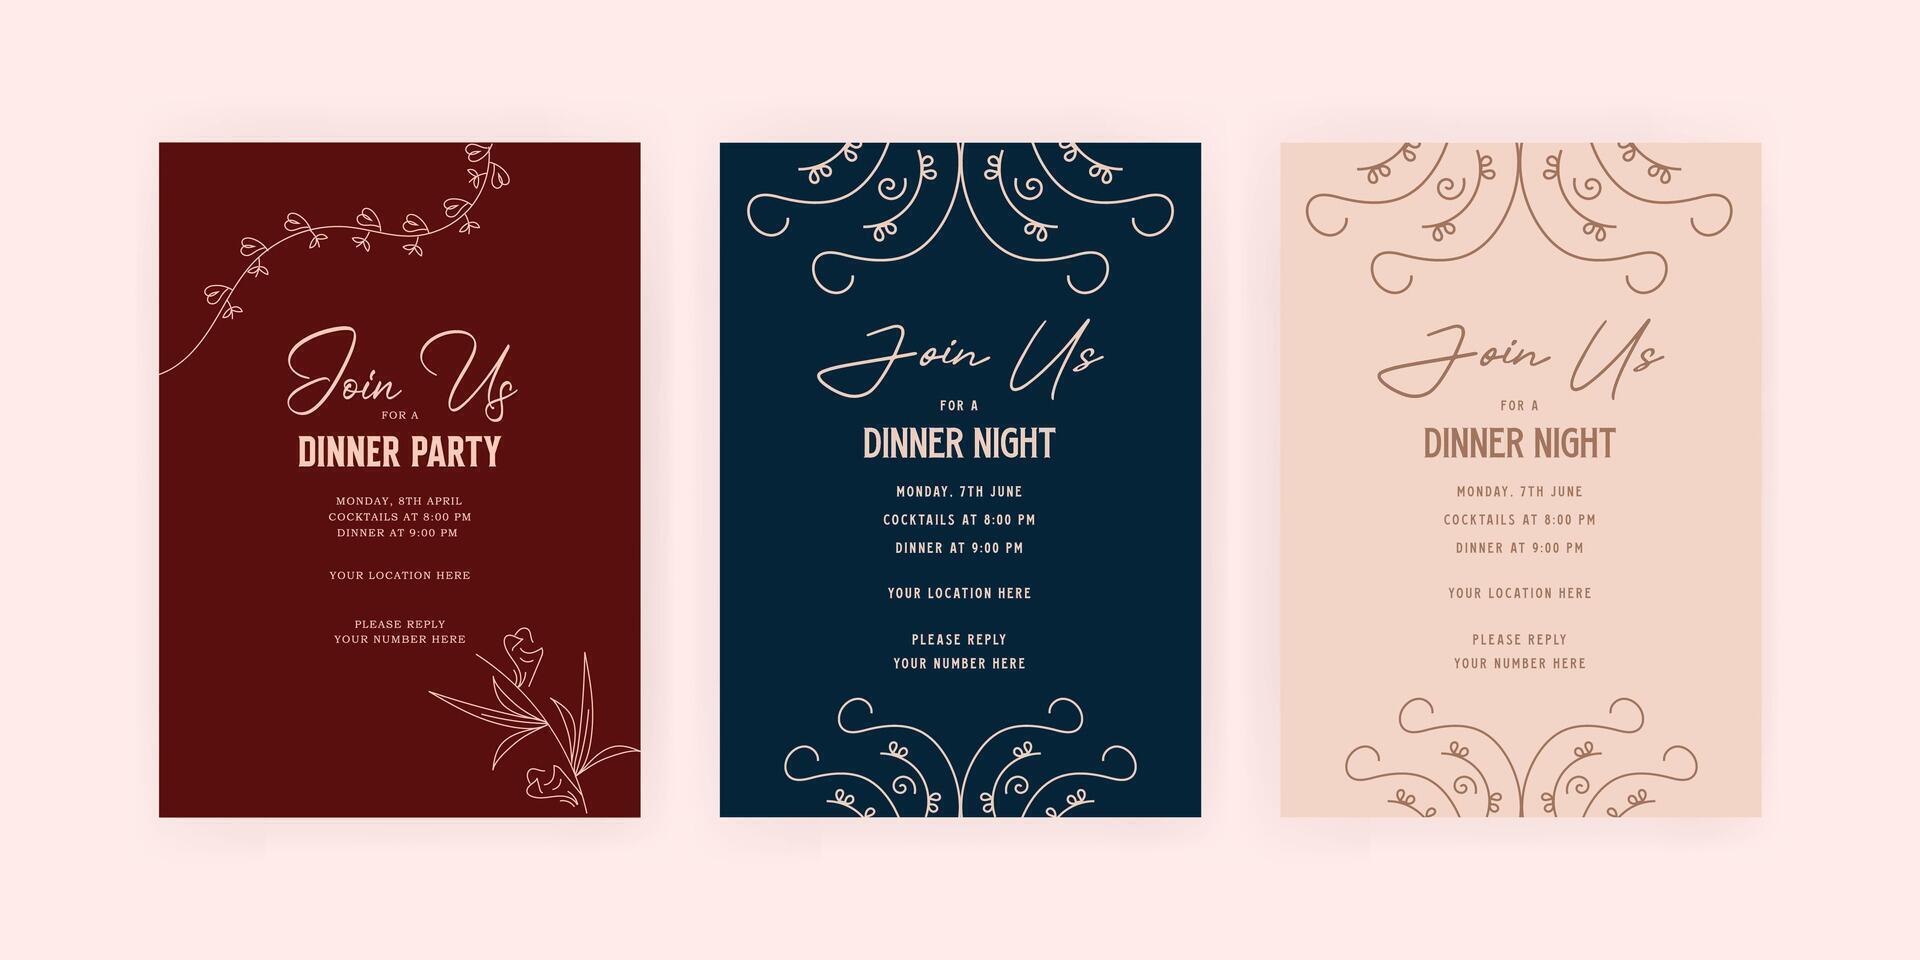 Dinner party invitation card template with luxury. floral. gold. Party poster a4 size. EPS vector illustration